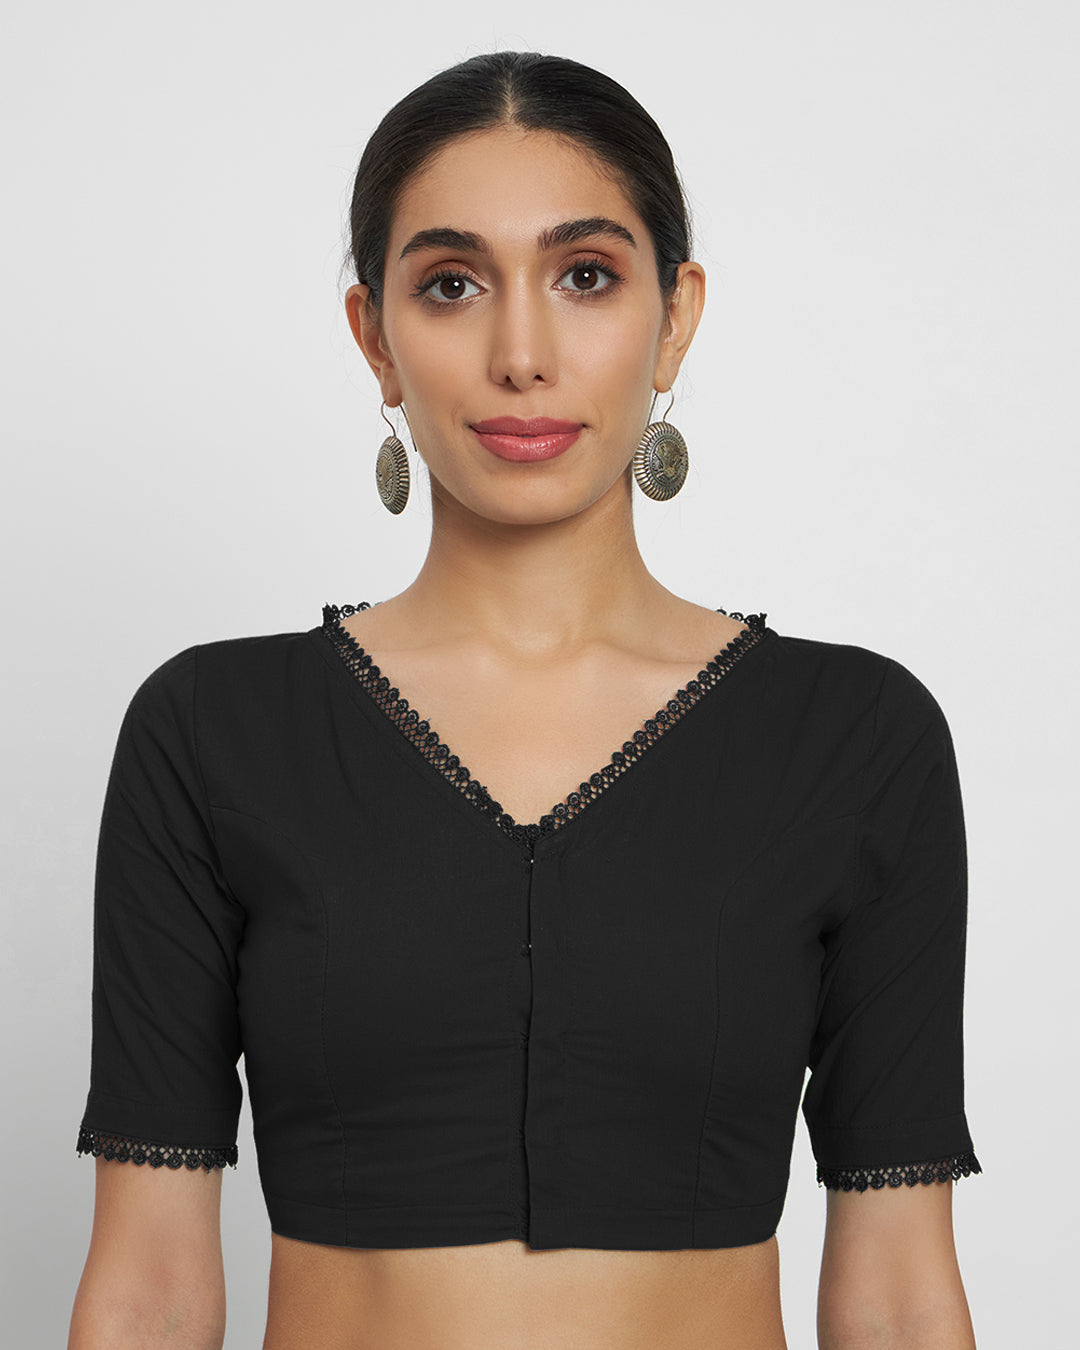 Combo: Classic Black & Queen's Gulabi V Neck Lace Medley Blouse- Set of 2